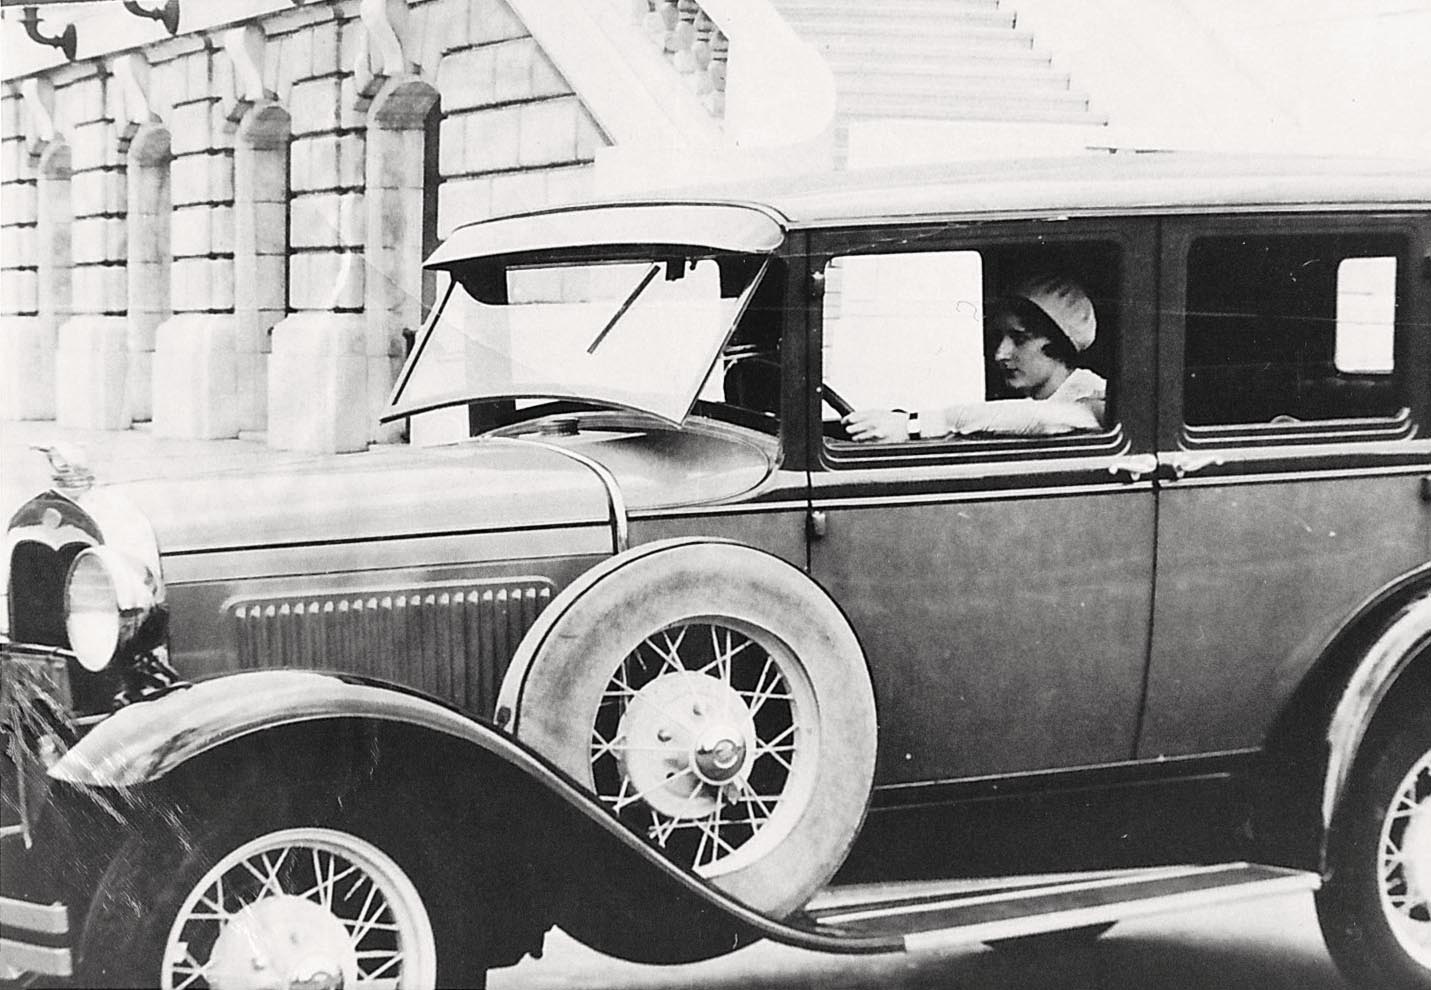 Audrey Weber worked as a commercial artist for Henry Ford and occasionally she modeled in new cars. Circa 1930s.